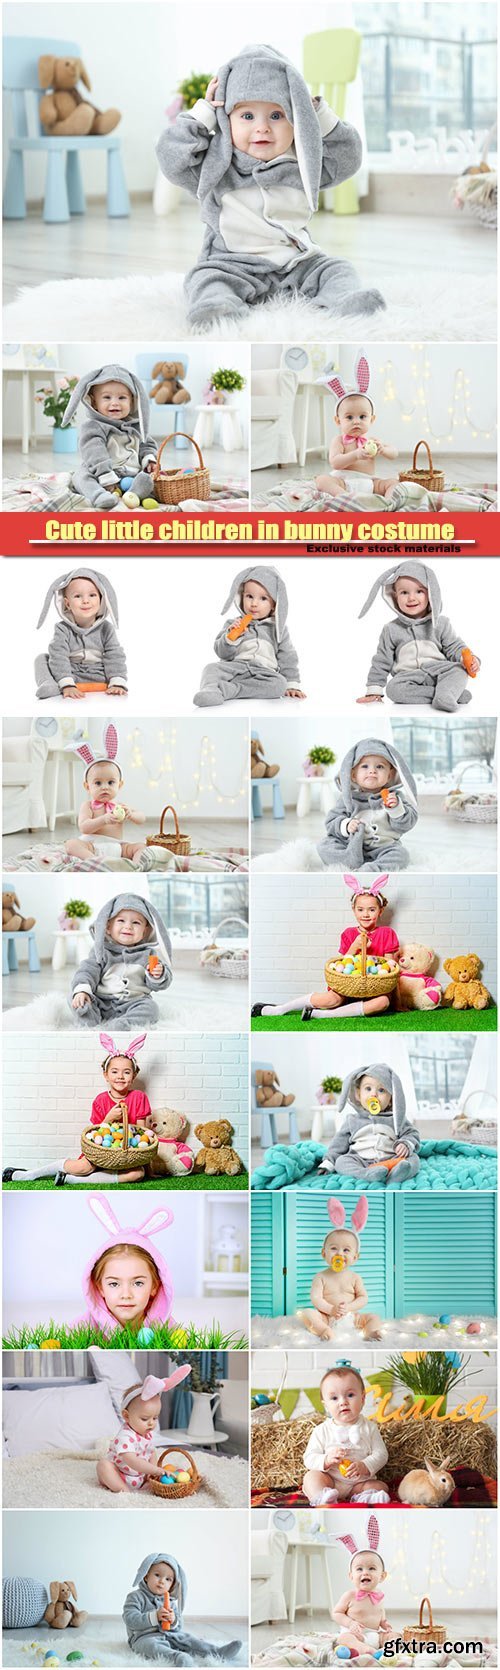 Cute little children in bunny costume, Easter holidays